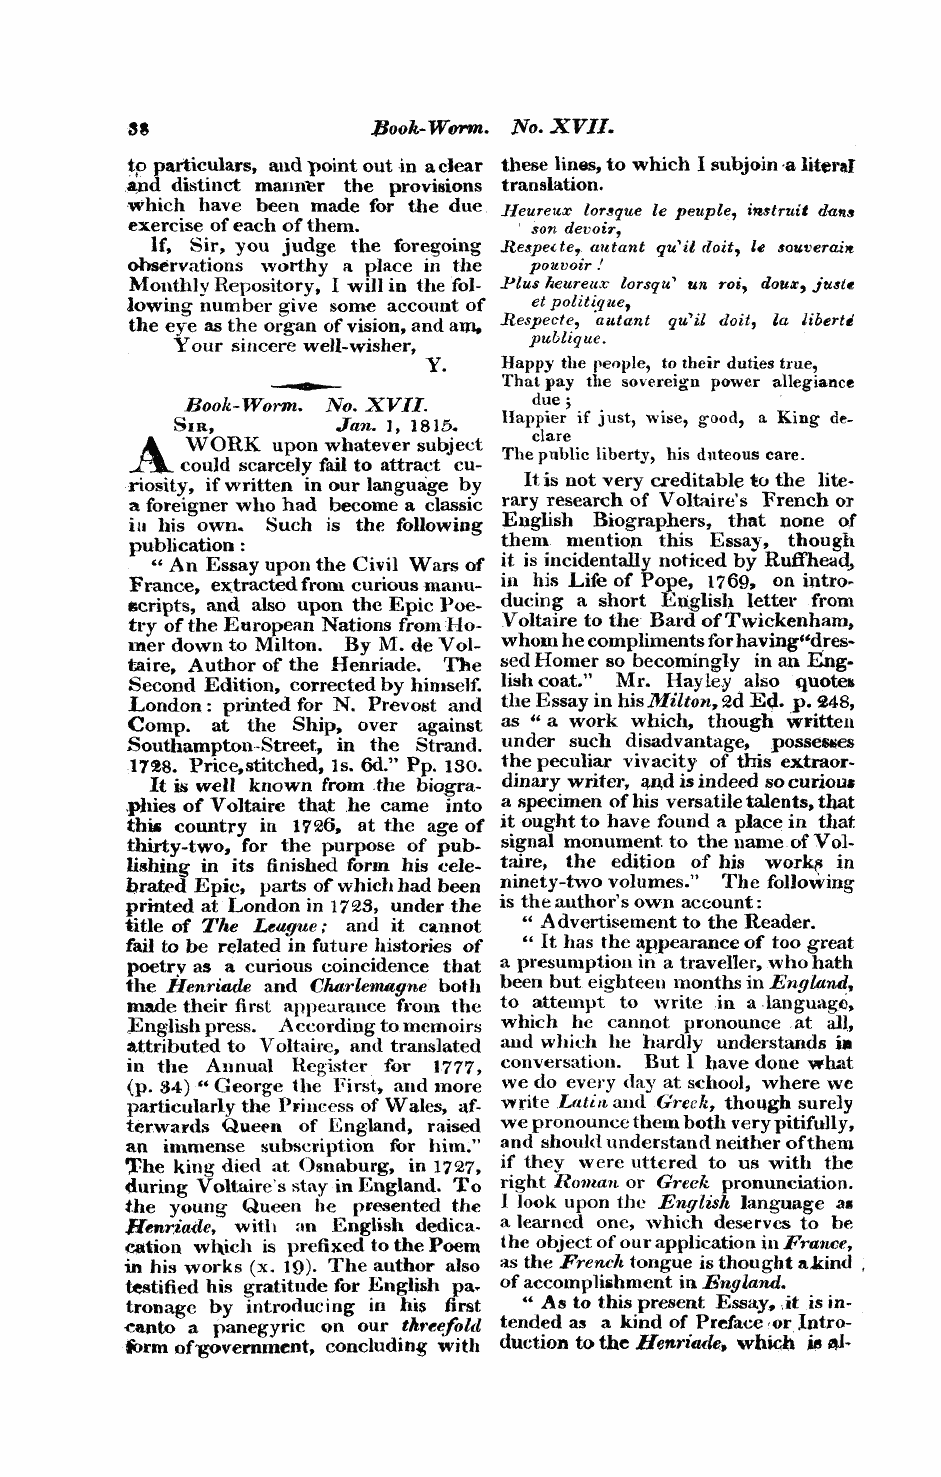 Monthly Repository (1806-1838) and Unitarian Chronicle (1832-1833): F Y, 1st edition: 38